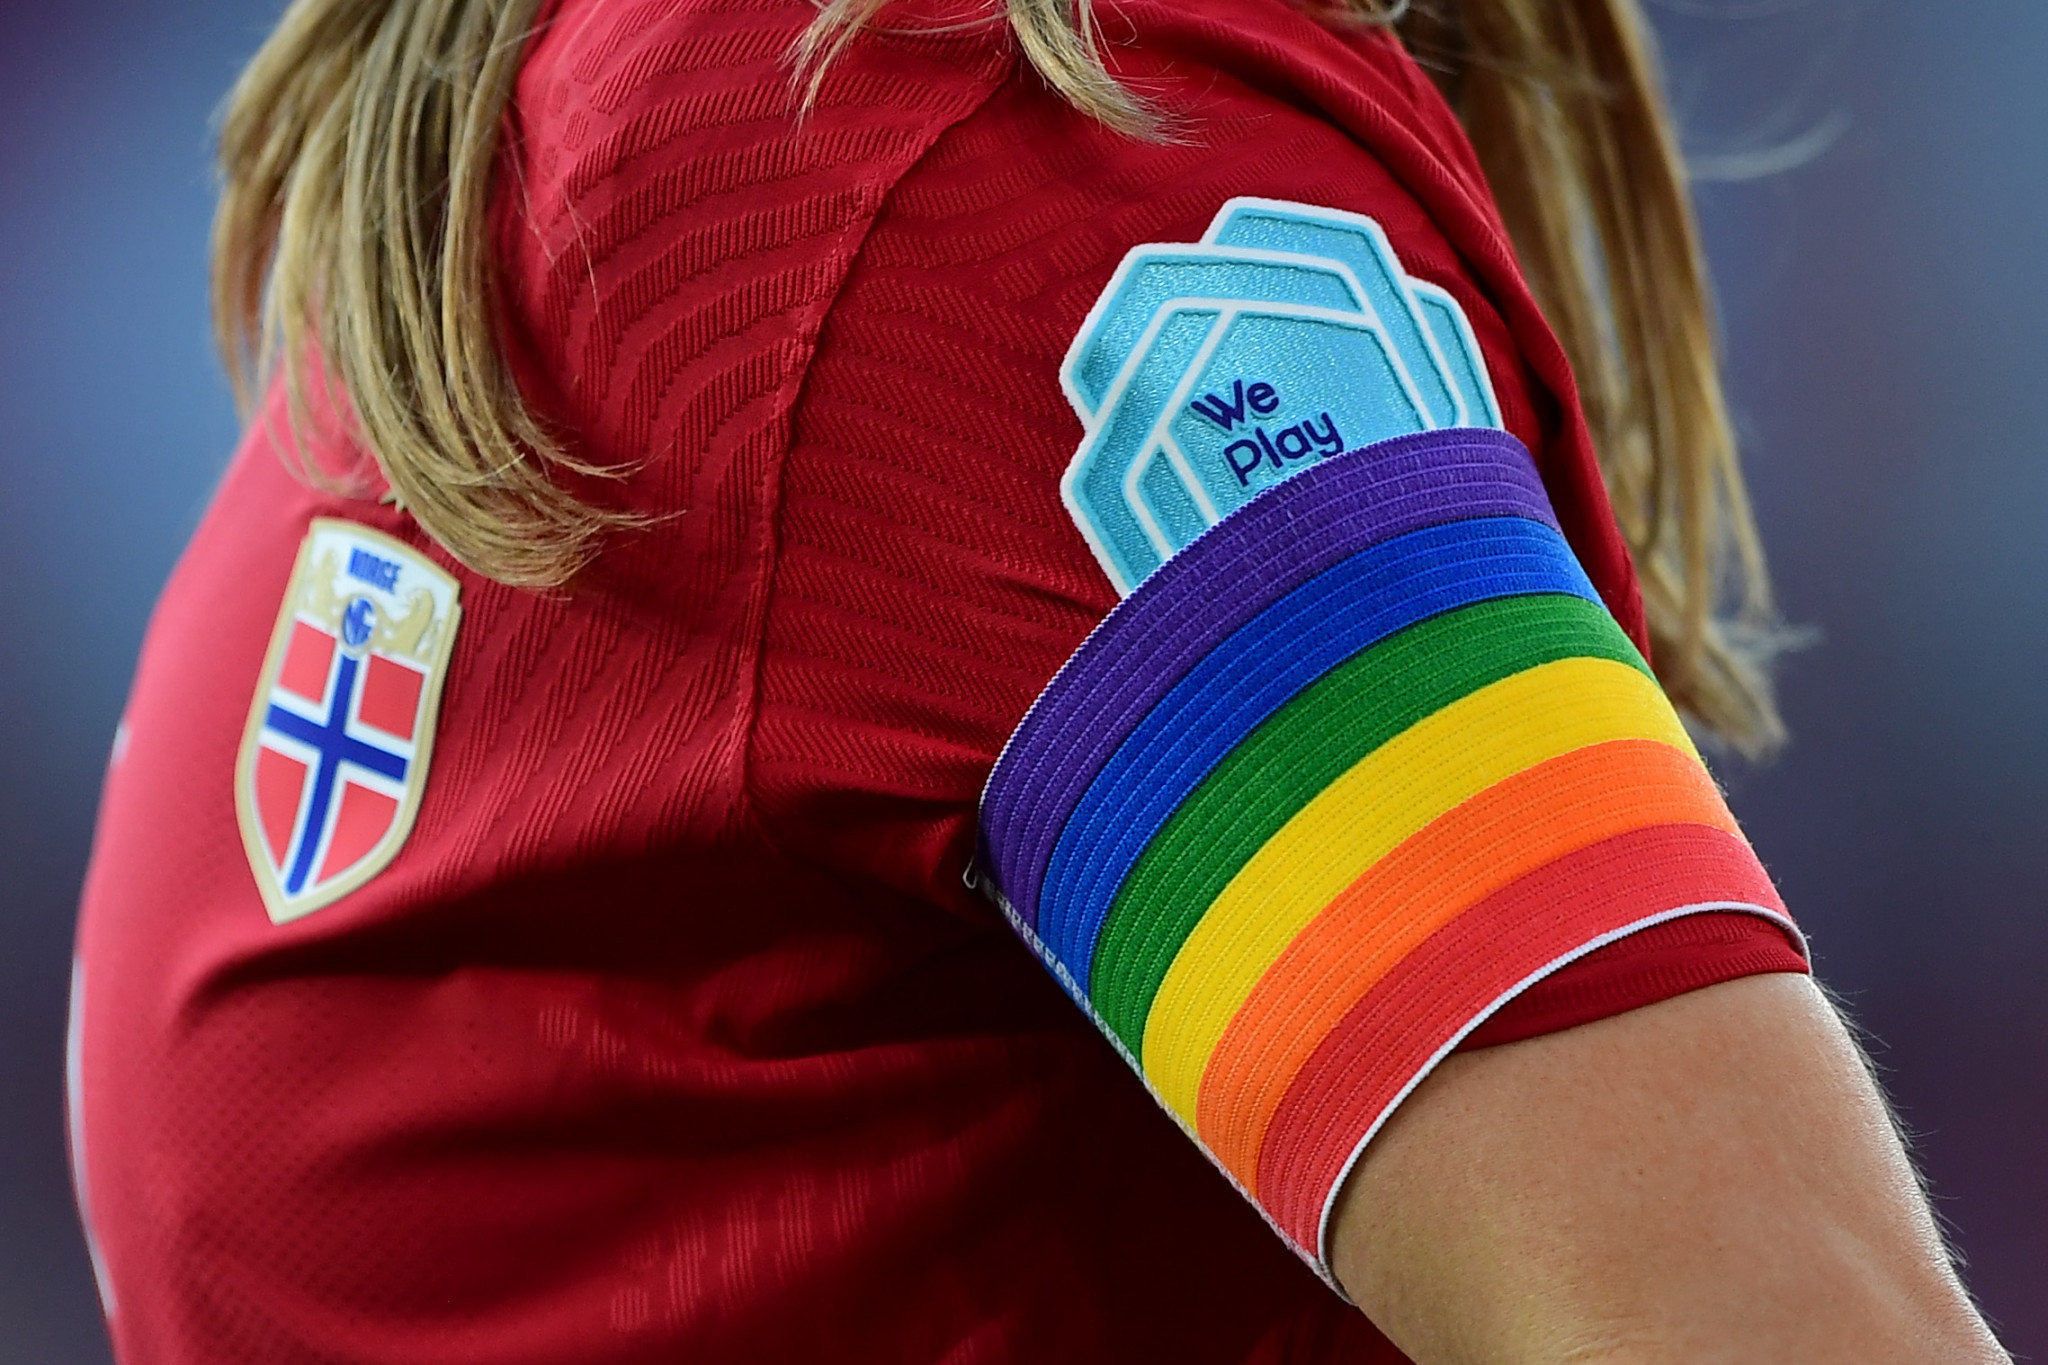 Rainbow armbands set to be permitted at FIFA Women's World Cup after Qatar 2022 controversy